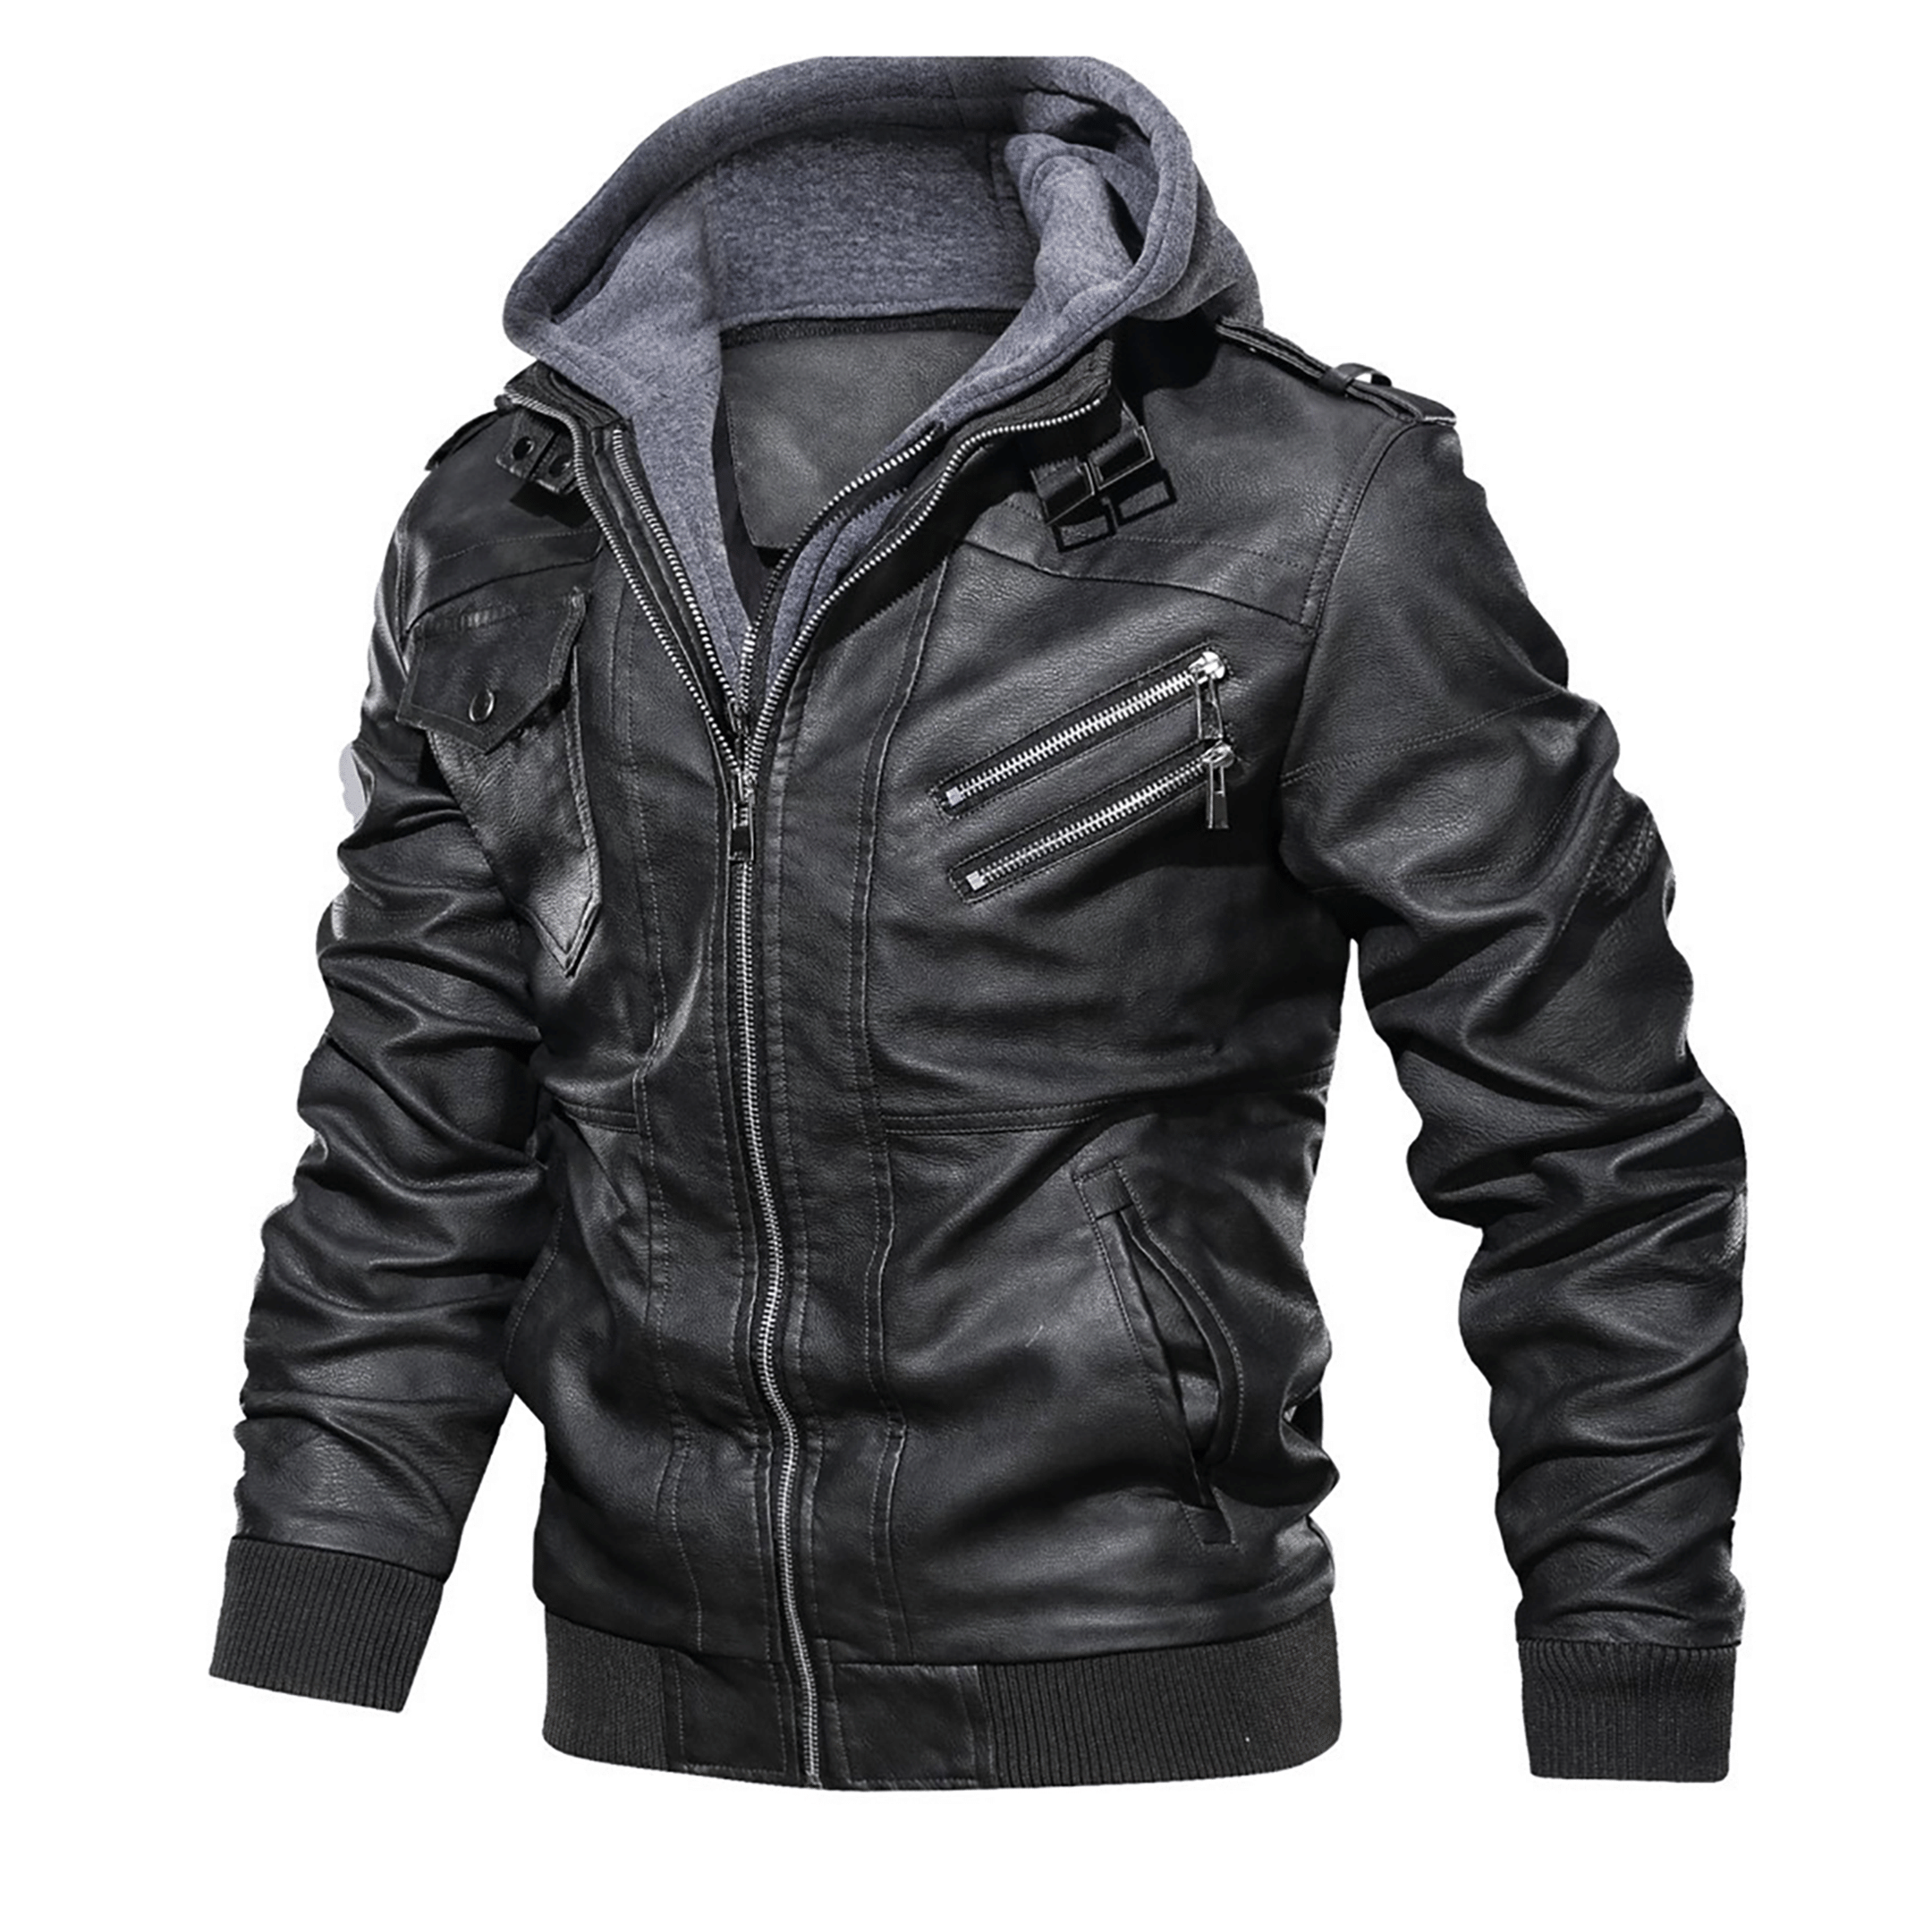 Top leather jackets and latest products 475